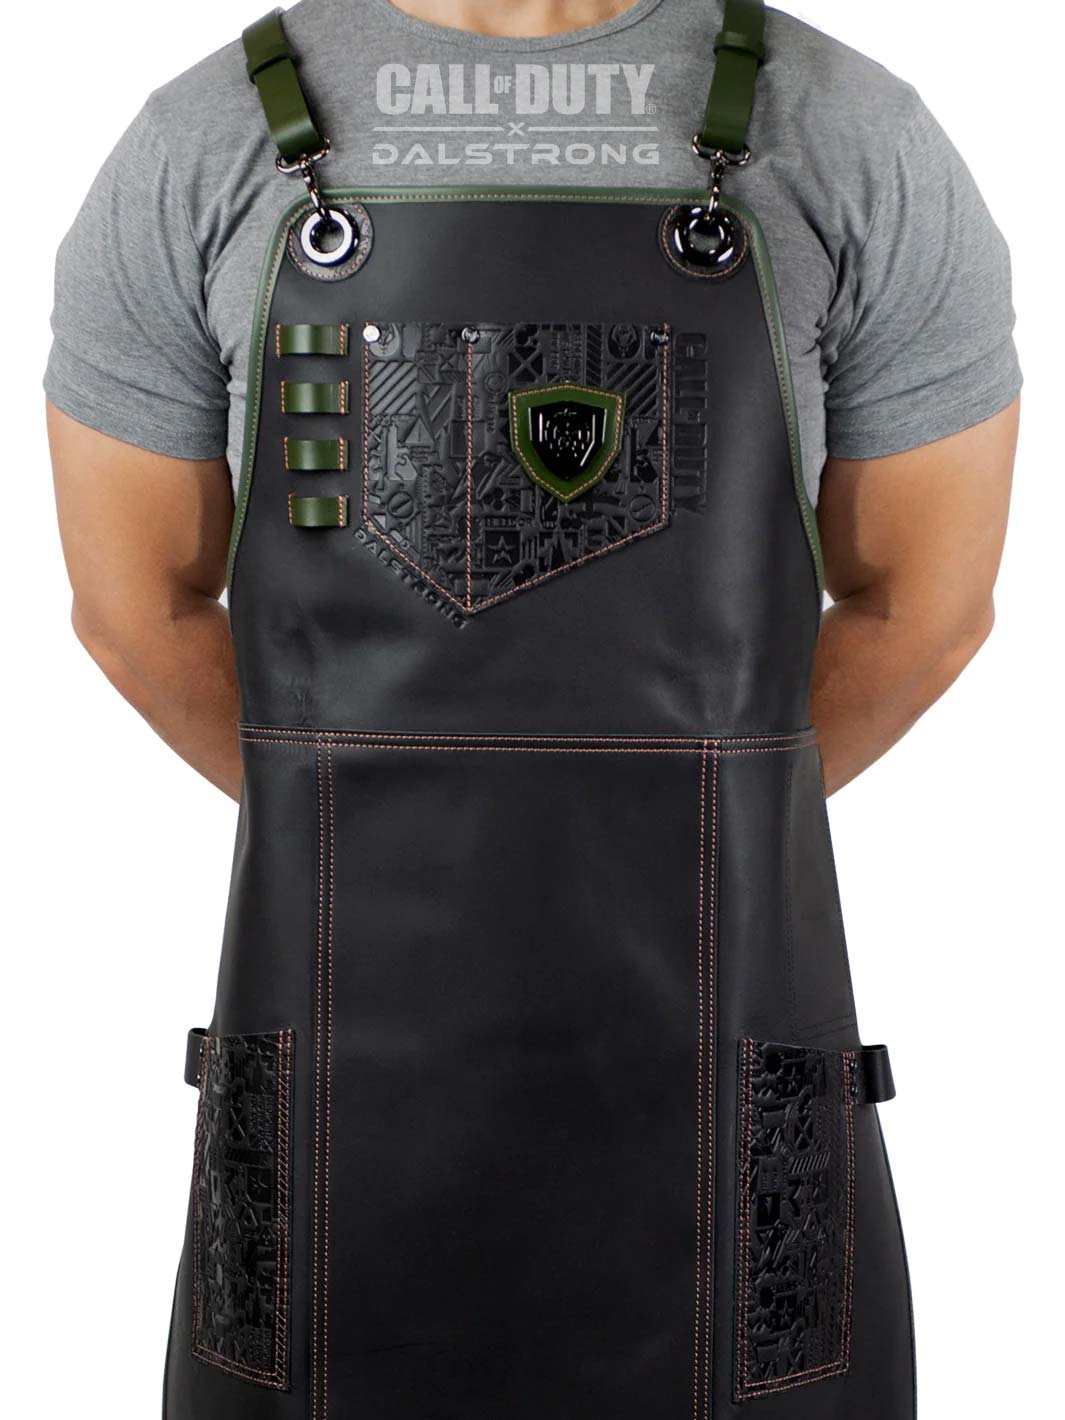 Limited Edition Chef Leather Apron | Call of Duty © Edition | Black Genuine Leather | EXCLUSIVE COLLECTOR APRON | Dalstrong ©